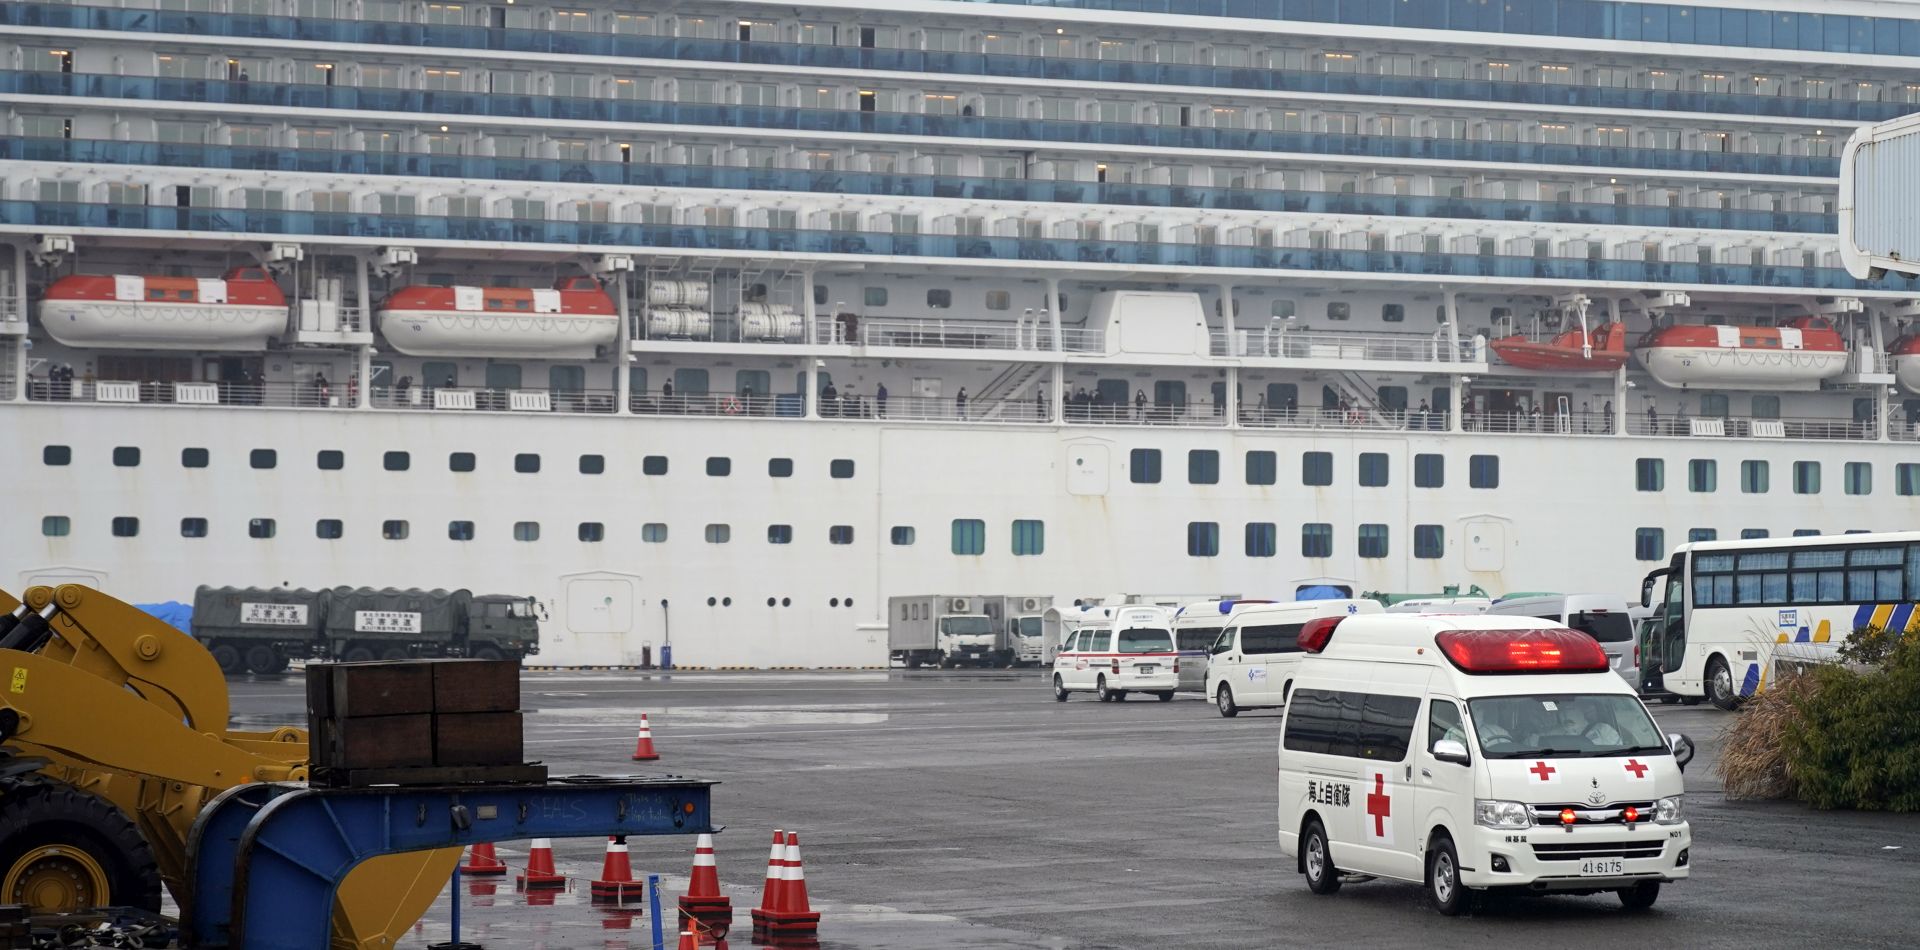 epa08220963 An ambulance believed to be carring an infected passenger of the Diamond Princess cruise ship leaves the Daikoku Pier Cruise Terminal in Yokohama, south of Tokyo, Japan, 16 February 2020. According to latest media reports, another 70 passengers of the Diamond Princess cruise ship have been tested positive for the Covid-19 coronavirus. A total number of 355 people from the ship have been infected by the new coronavirus.  EPA/FRANCK ROBICHON